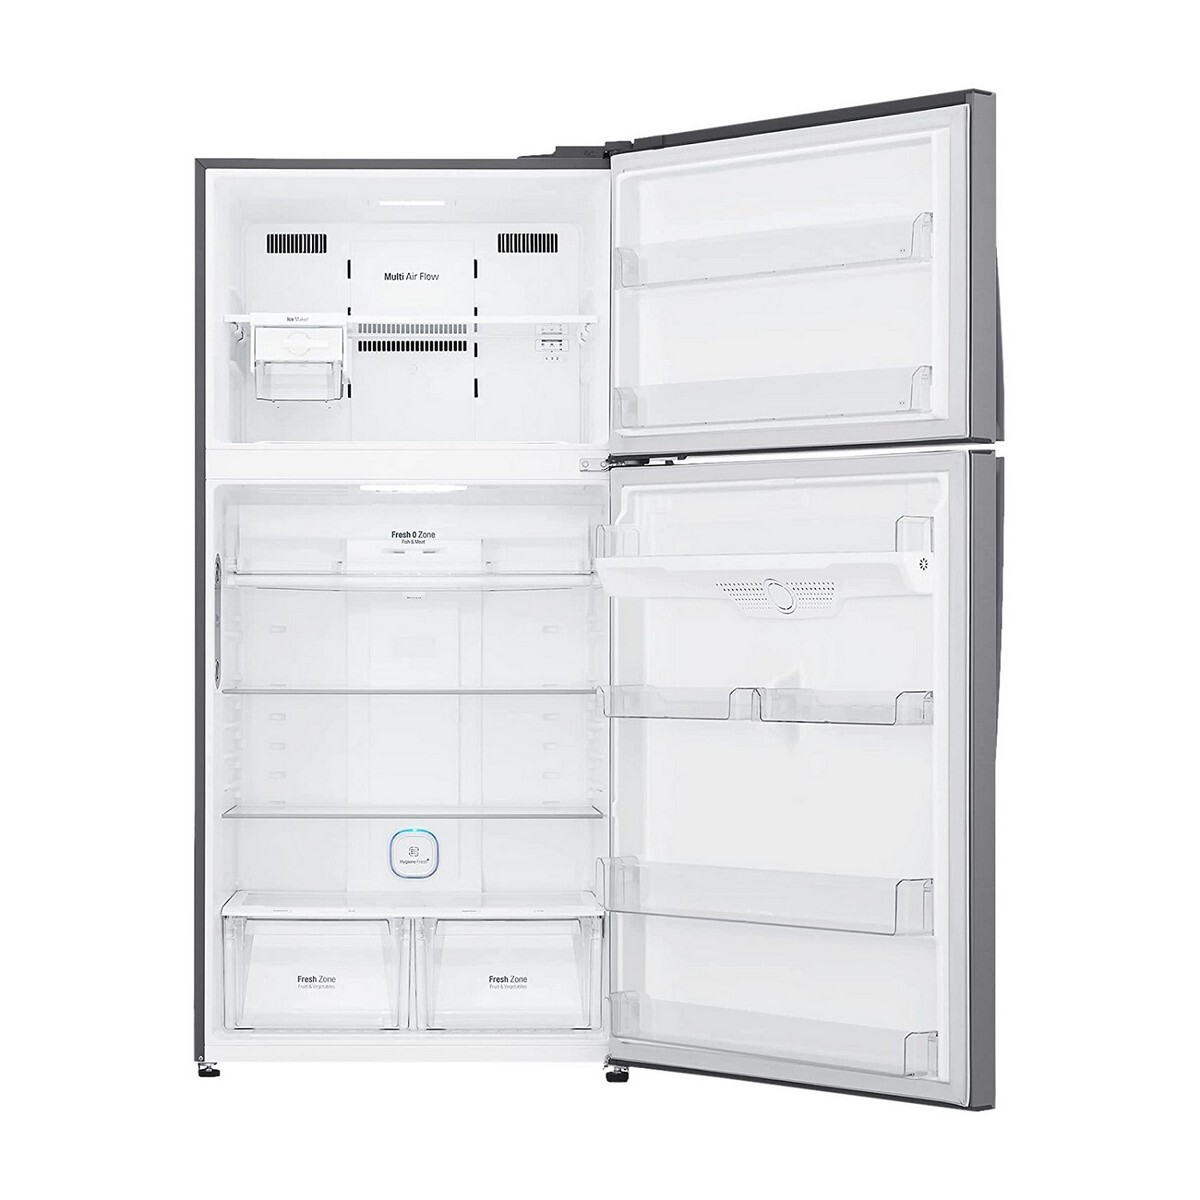 LG Frost Free Double Door Refrigerator GR-H812HLHM 592 L Platinum Silver